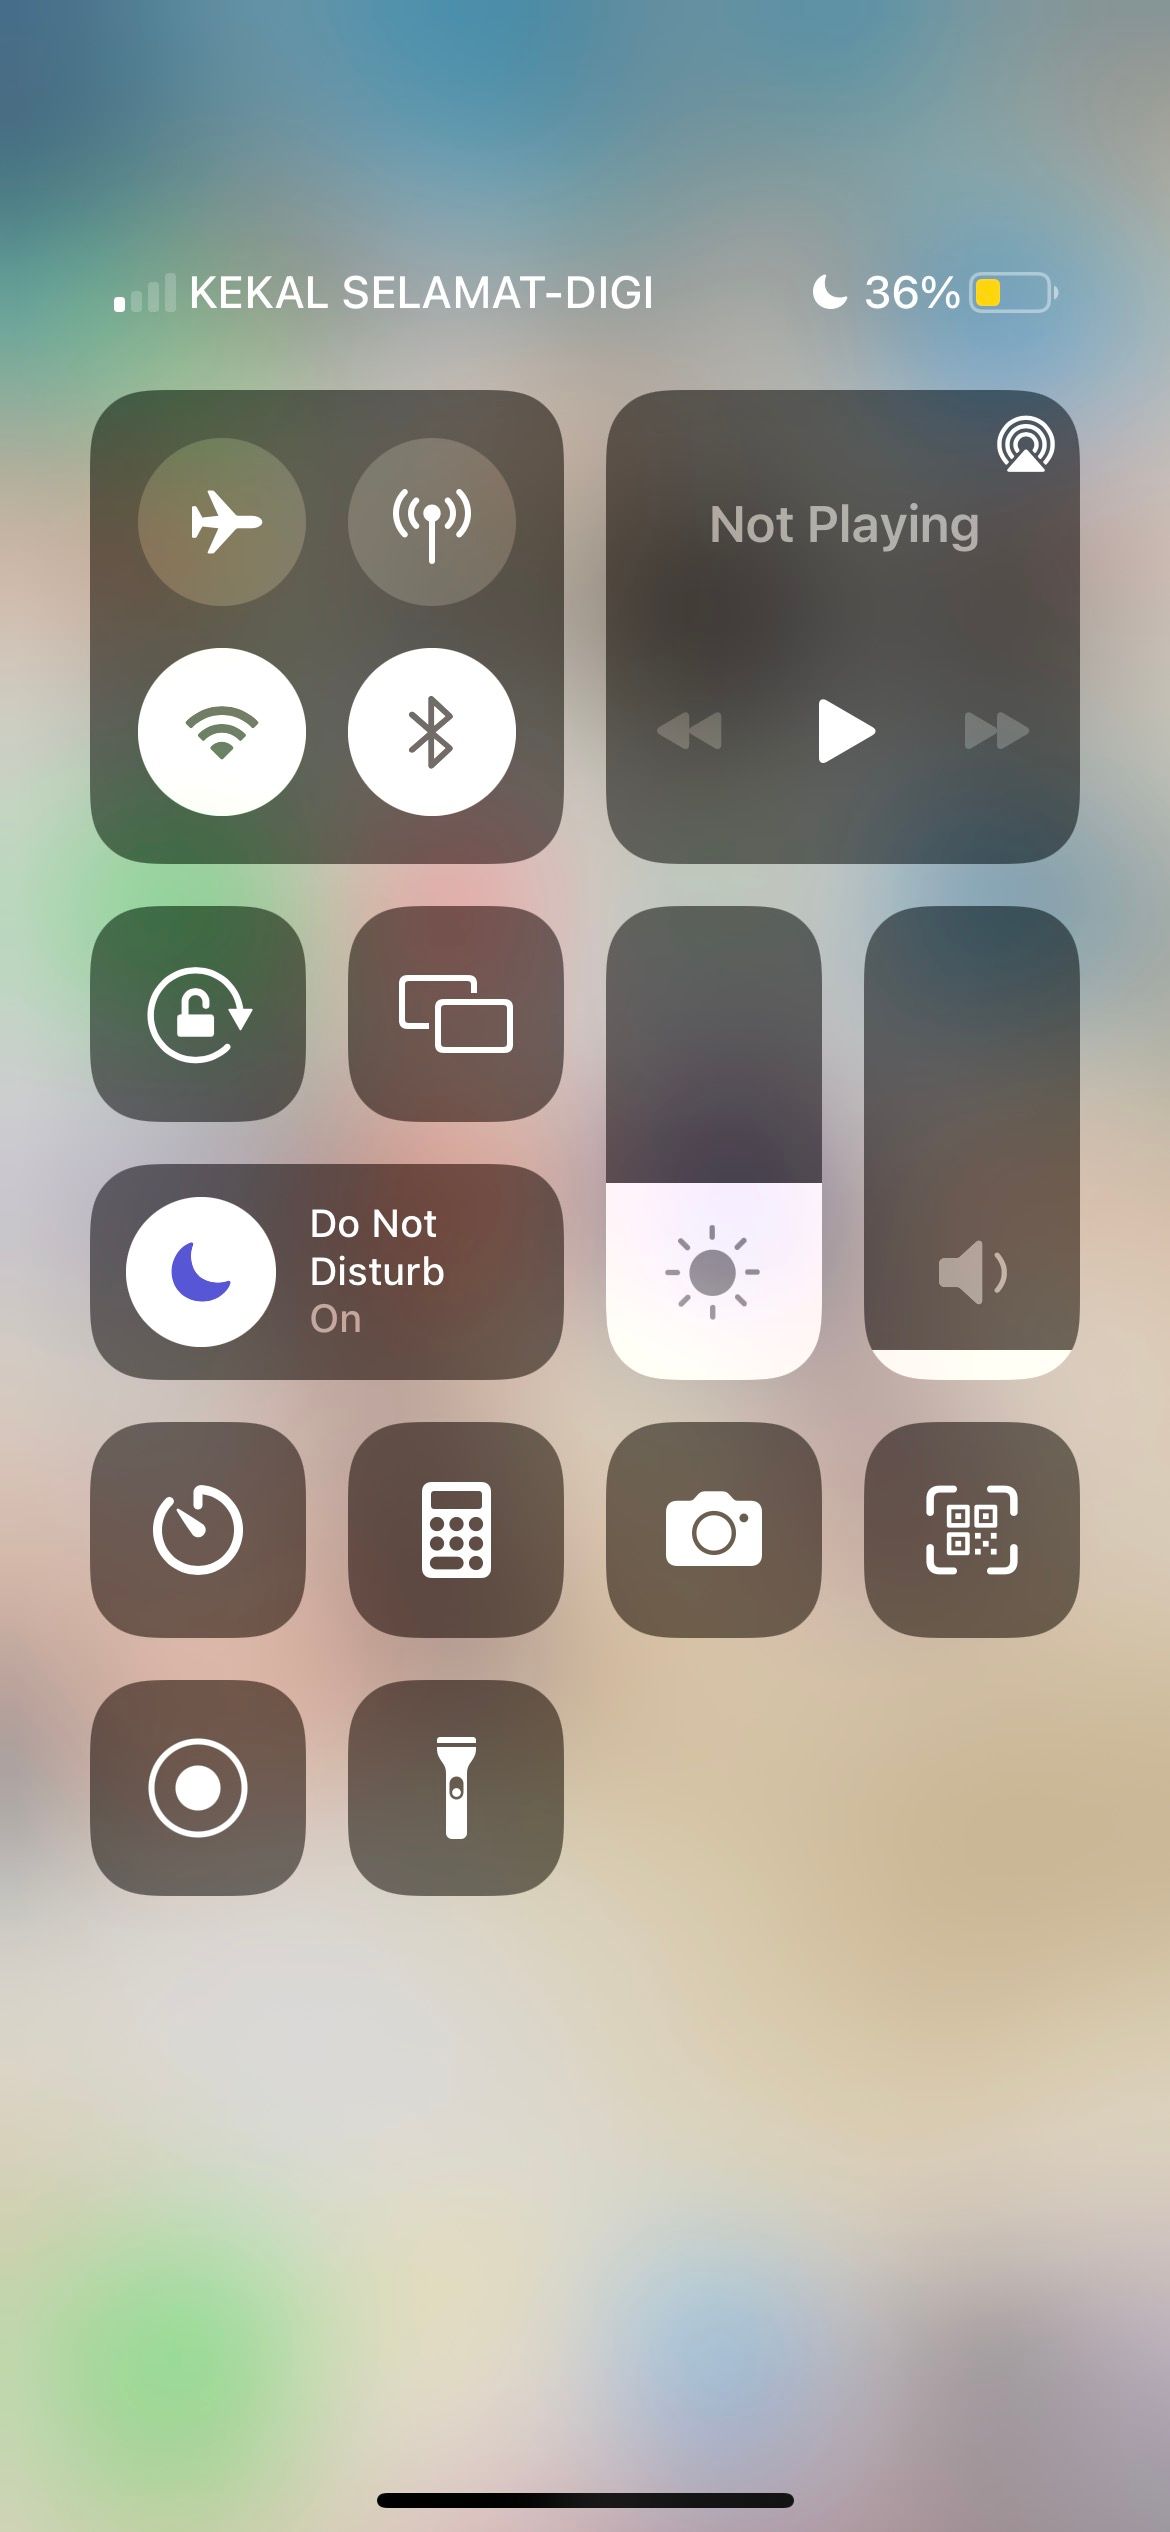 do not disturb mode turned on in iphone control center